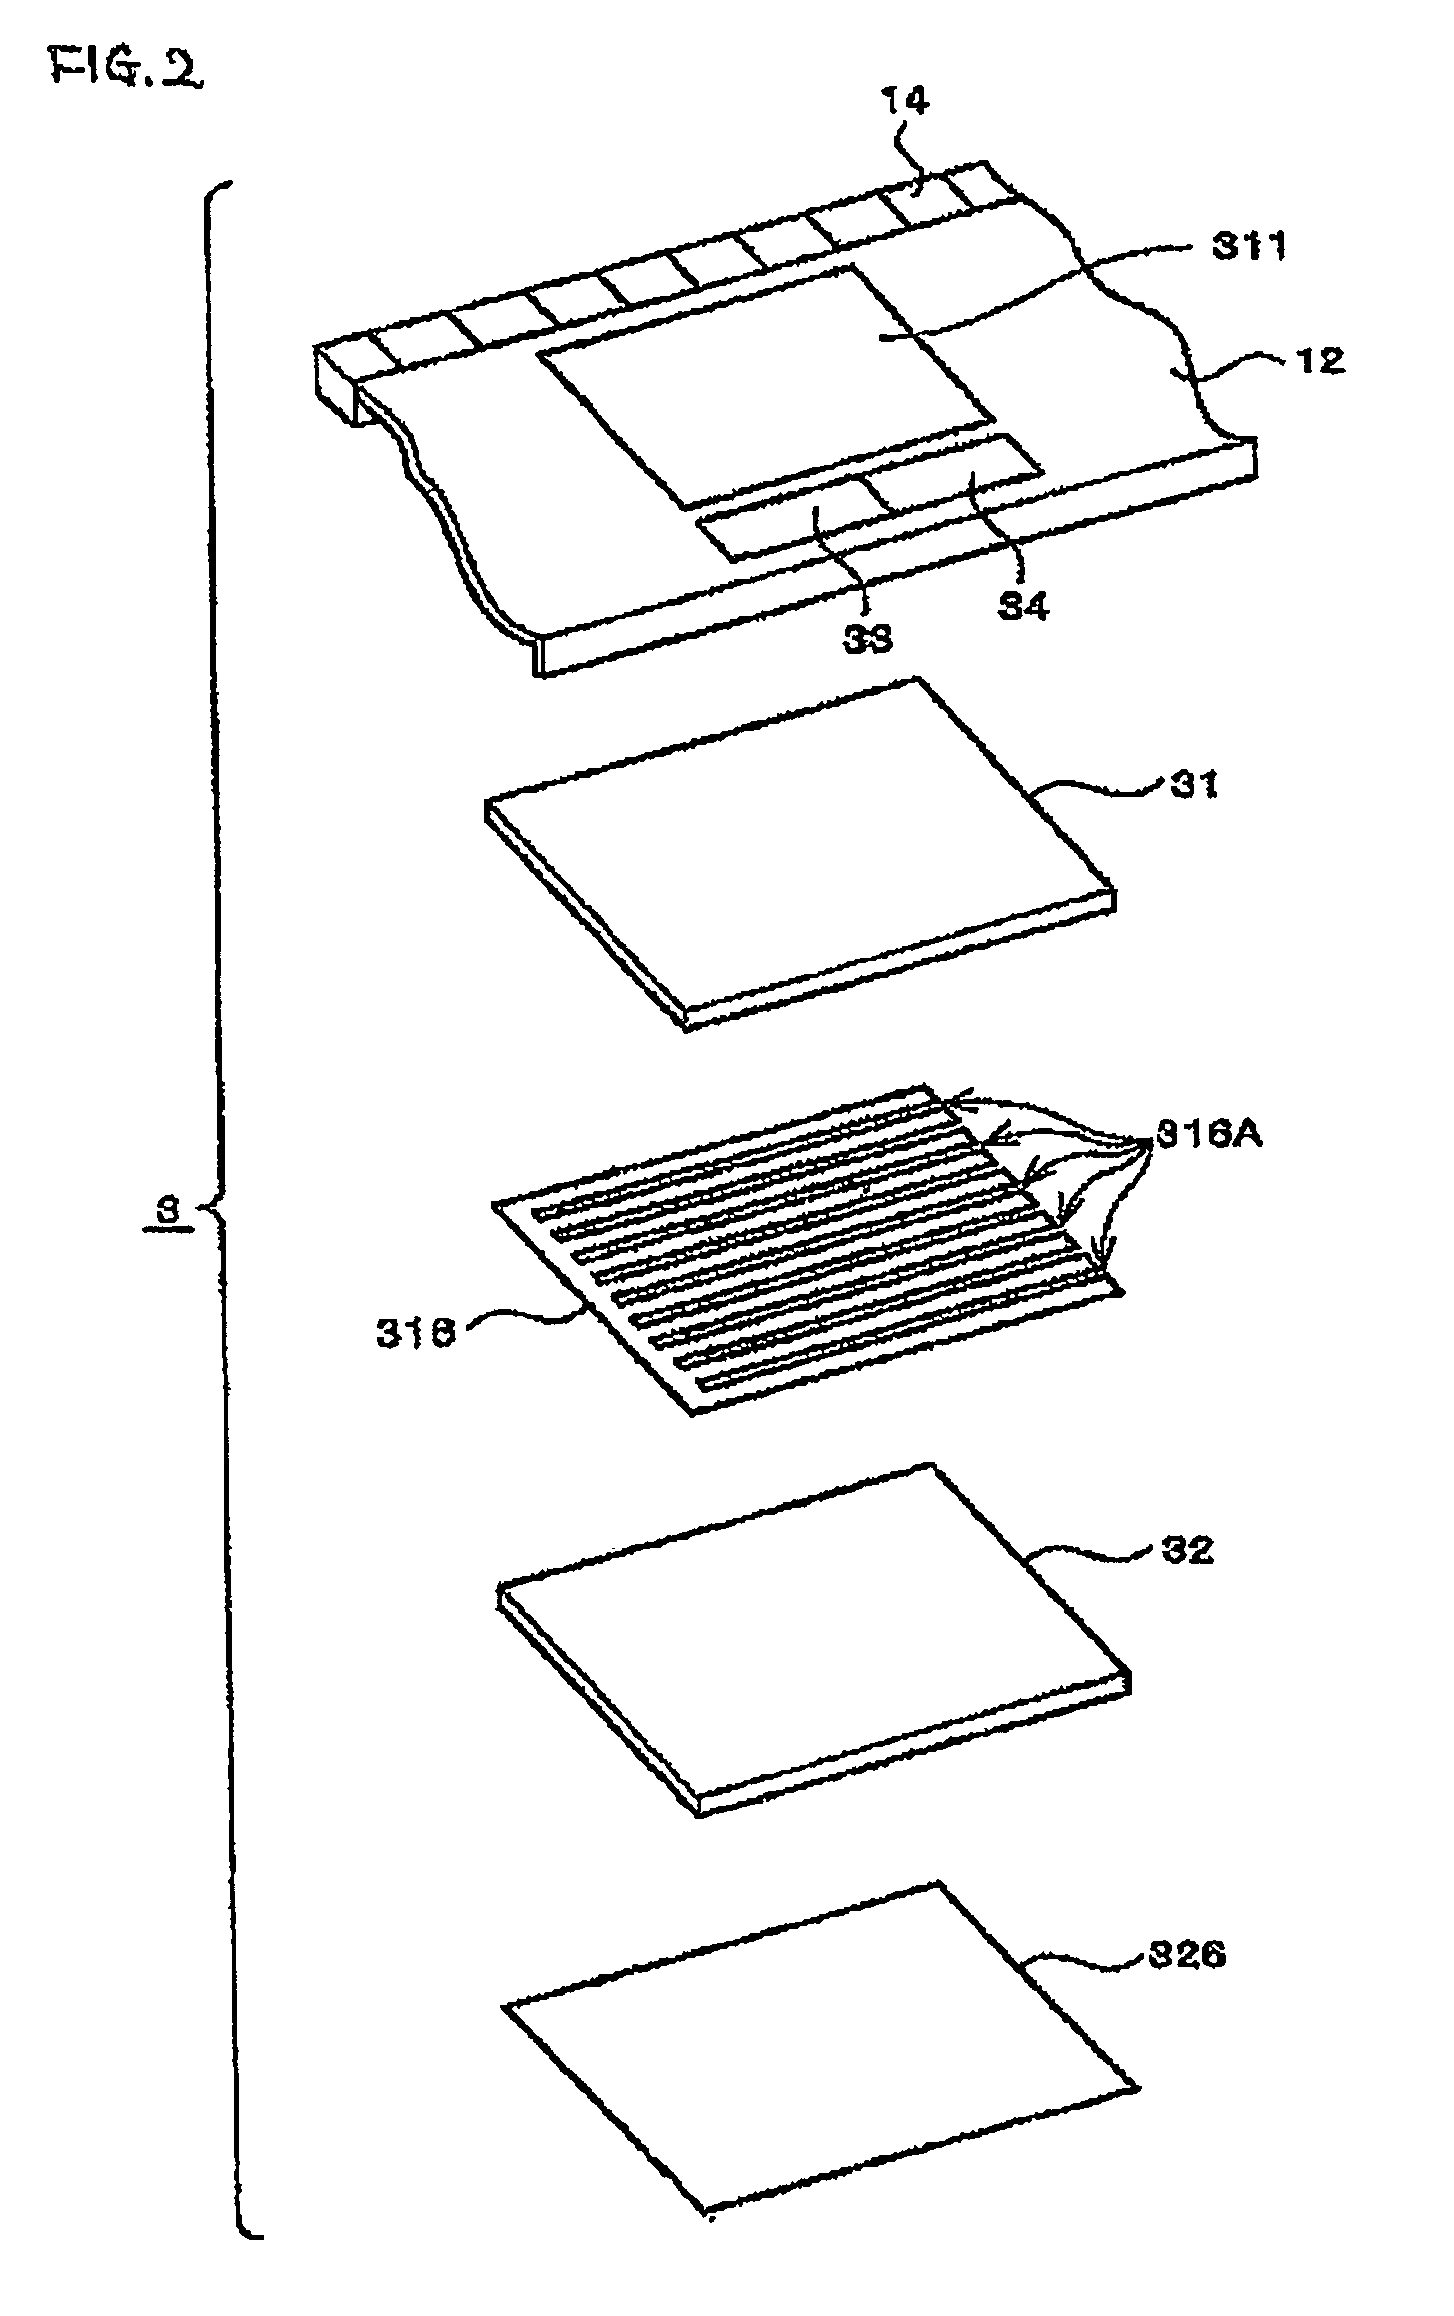 Information processing apparatus, position detecting apparatus and sensing part for performing a detection operation